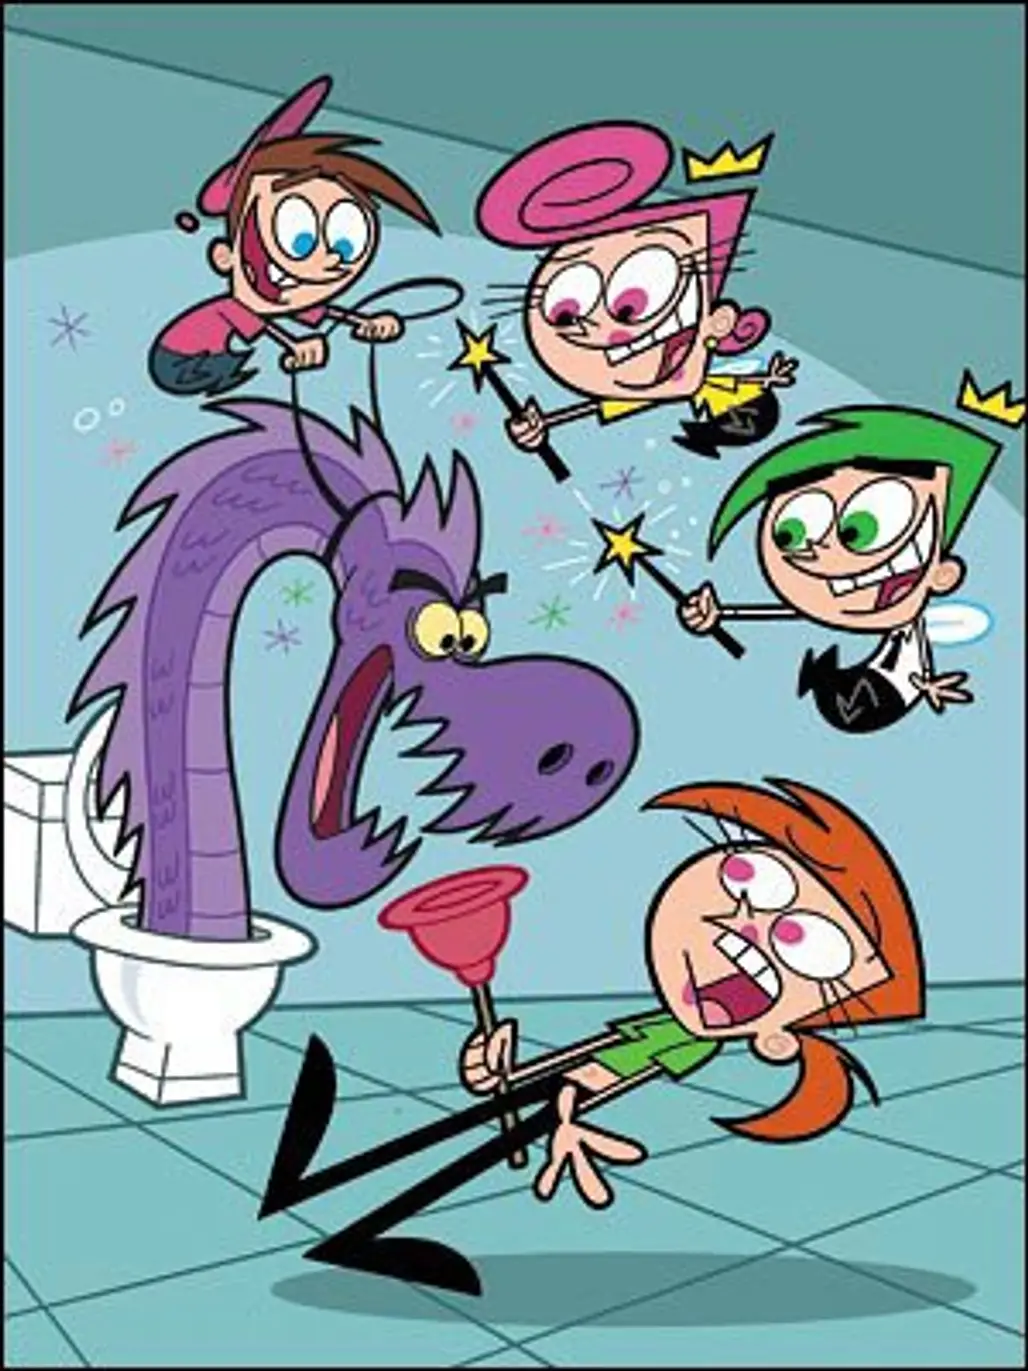 The Turners from “Fairly Odd Parents”